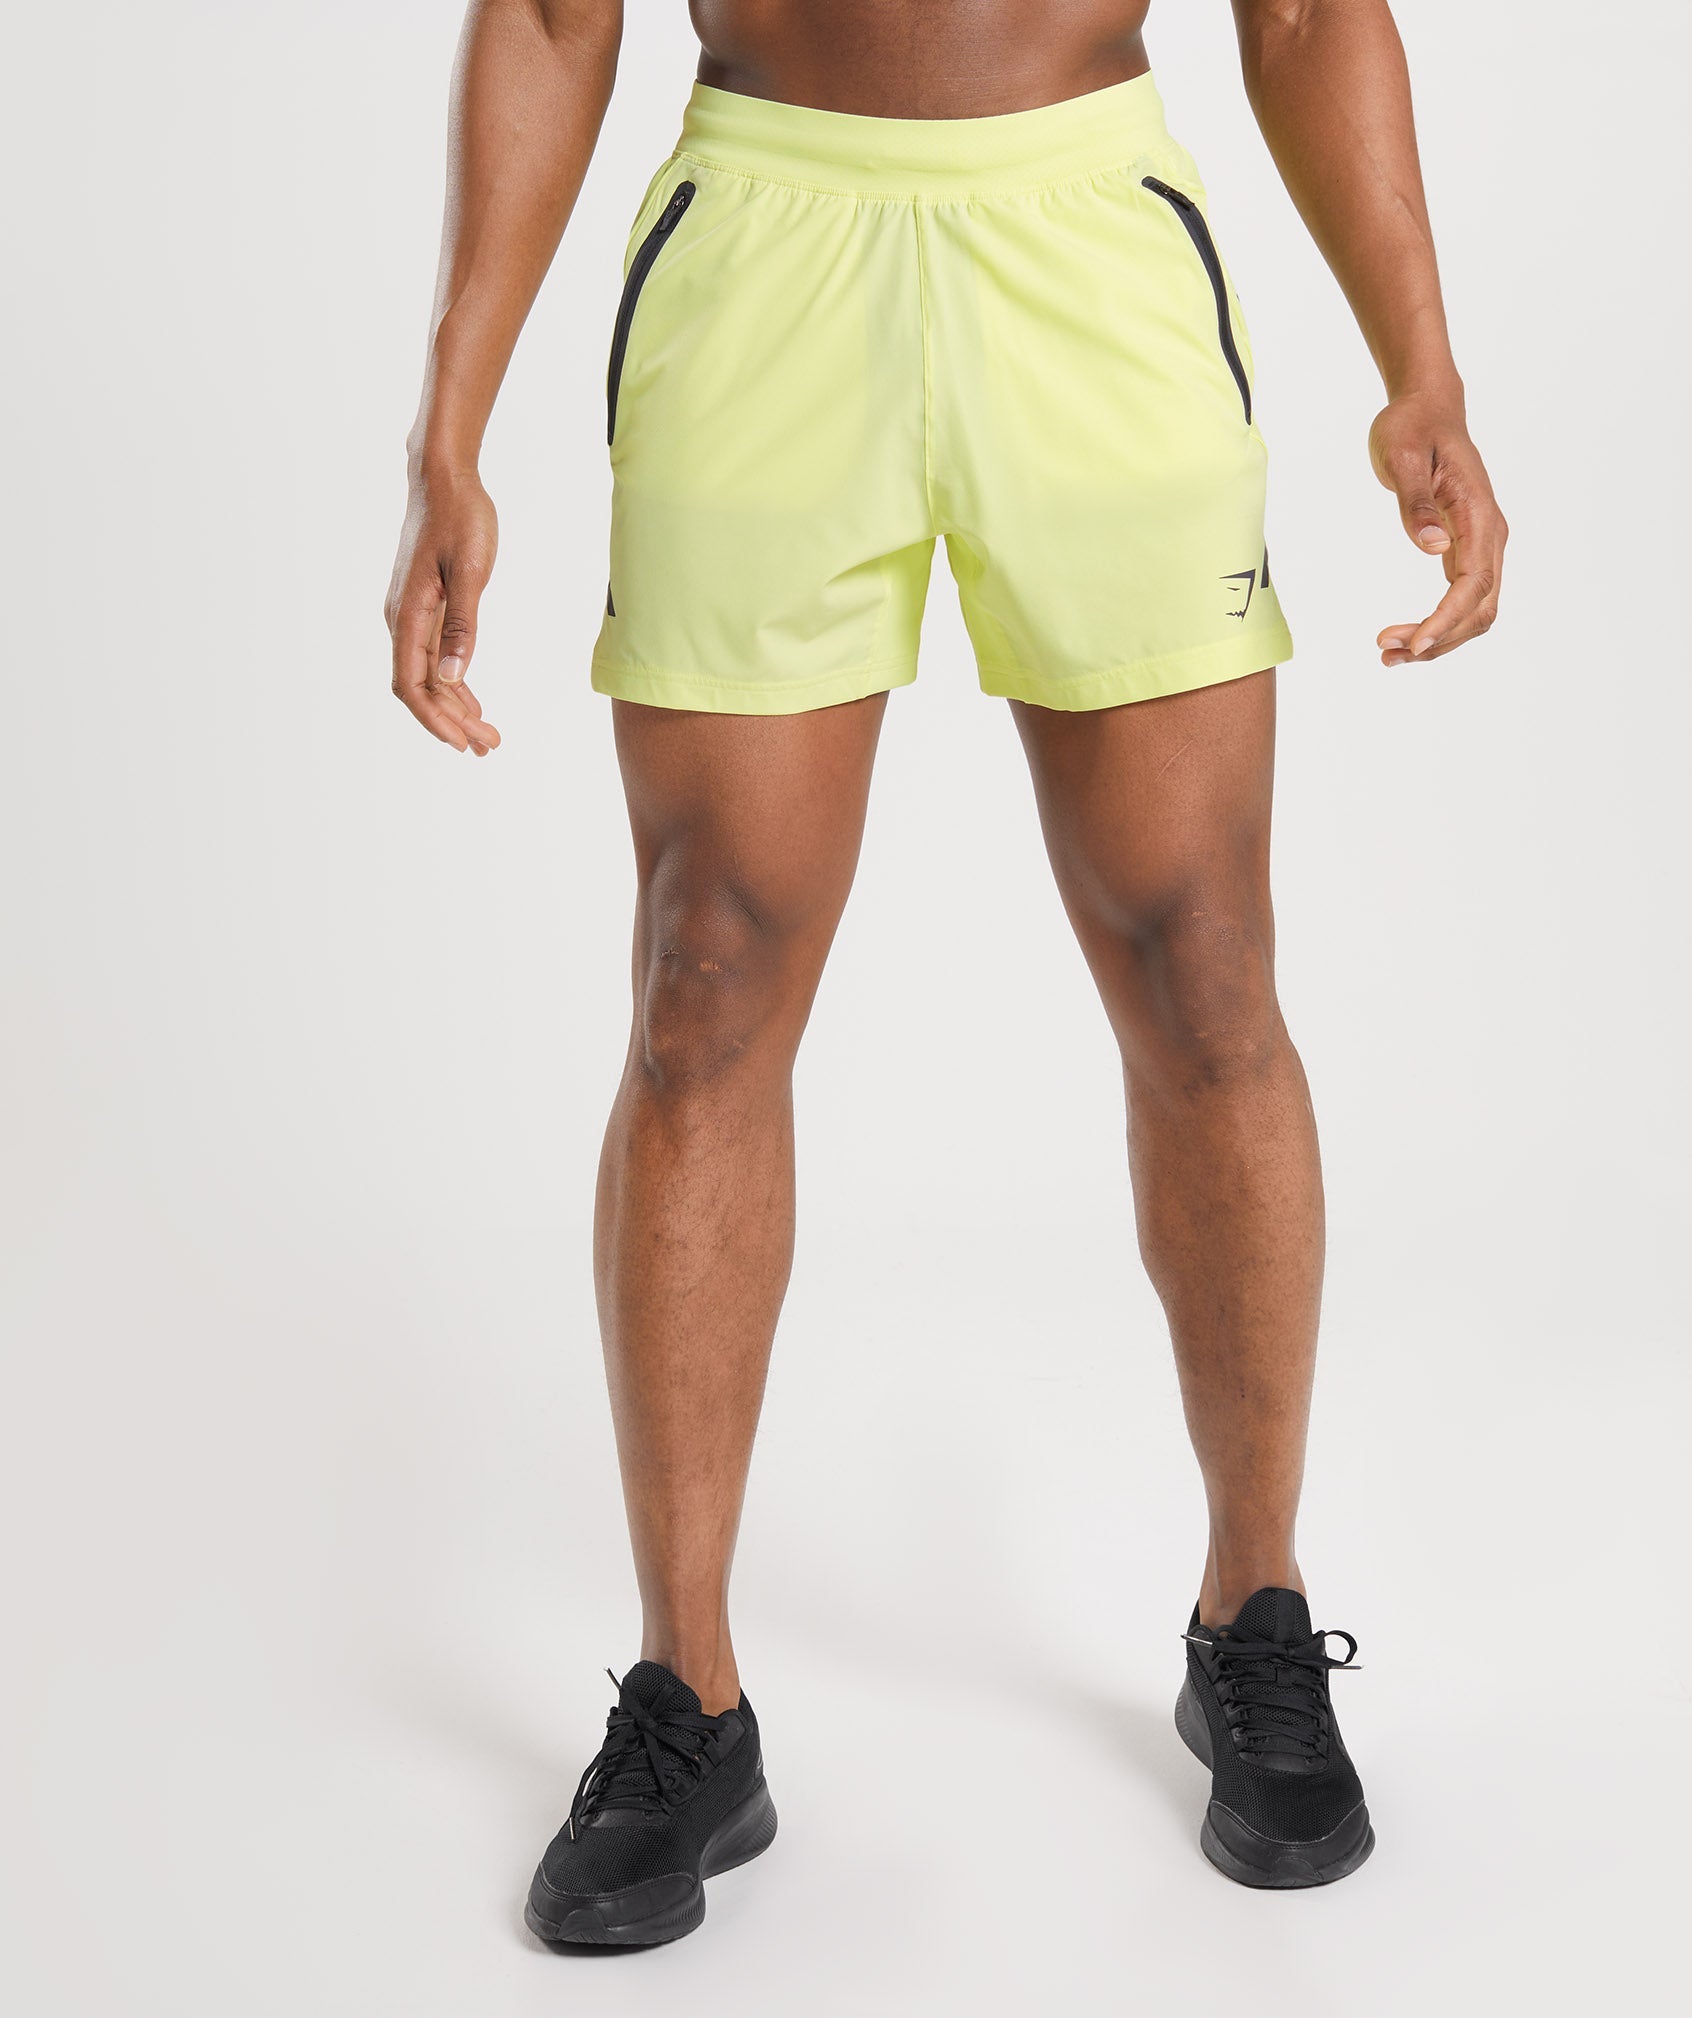 Apex 5" Perform Shorts product image 1